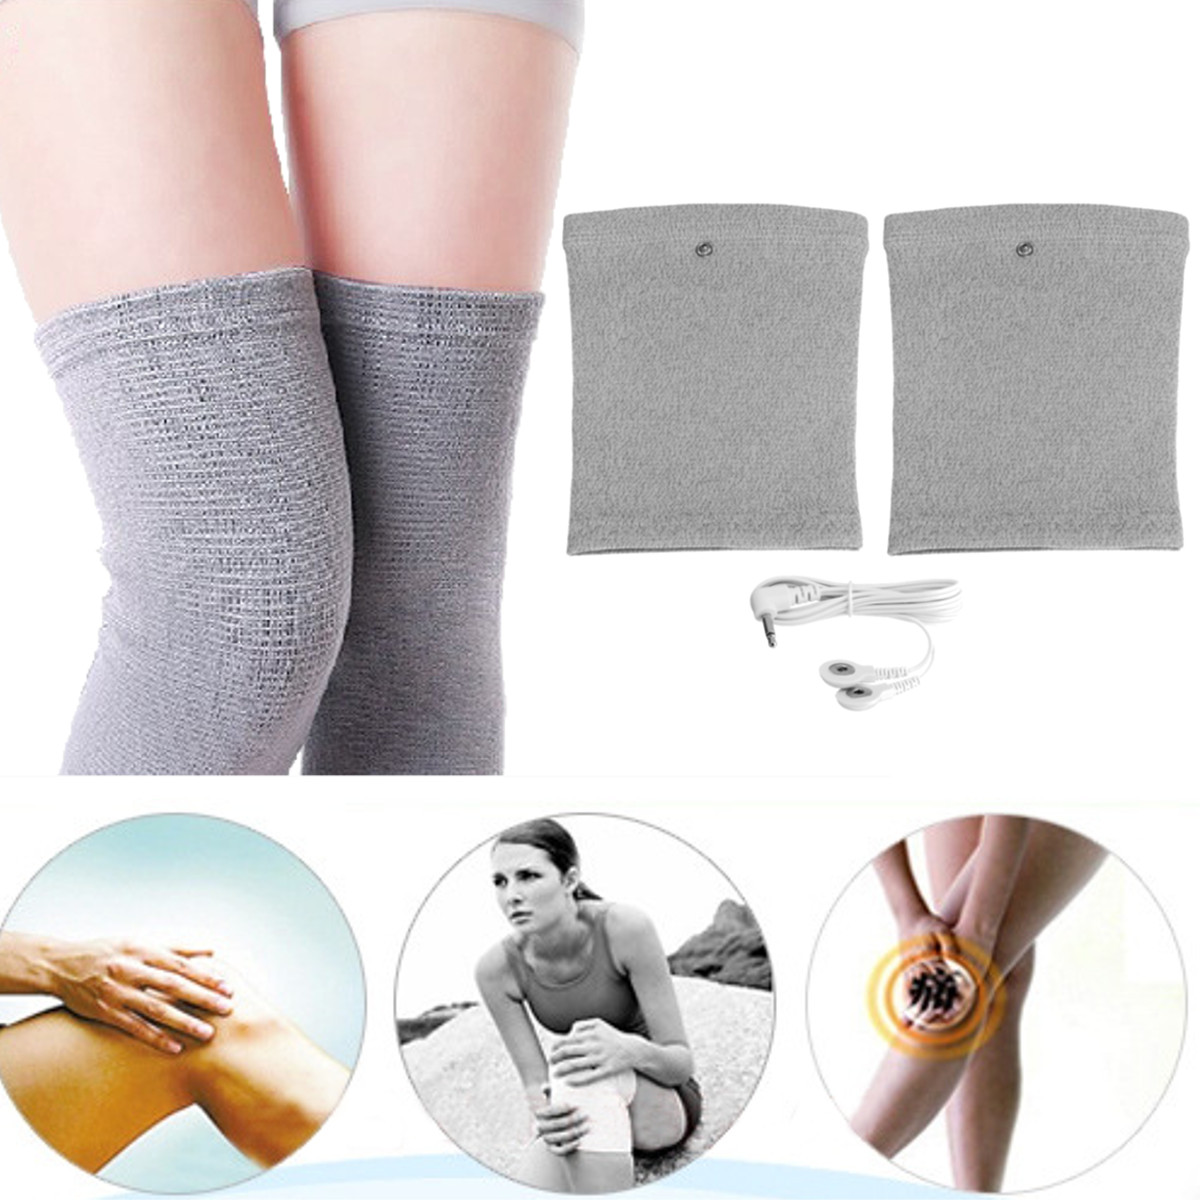 

KALOAD 1 Pair Knee Electrode Tens Pads Electronic Pulse Shock Massager Leg Muscle Pain Relief Safety Gear